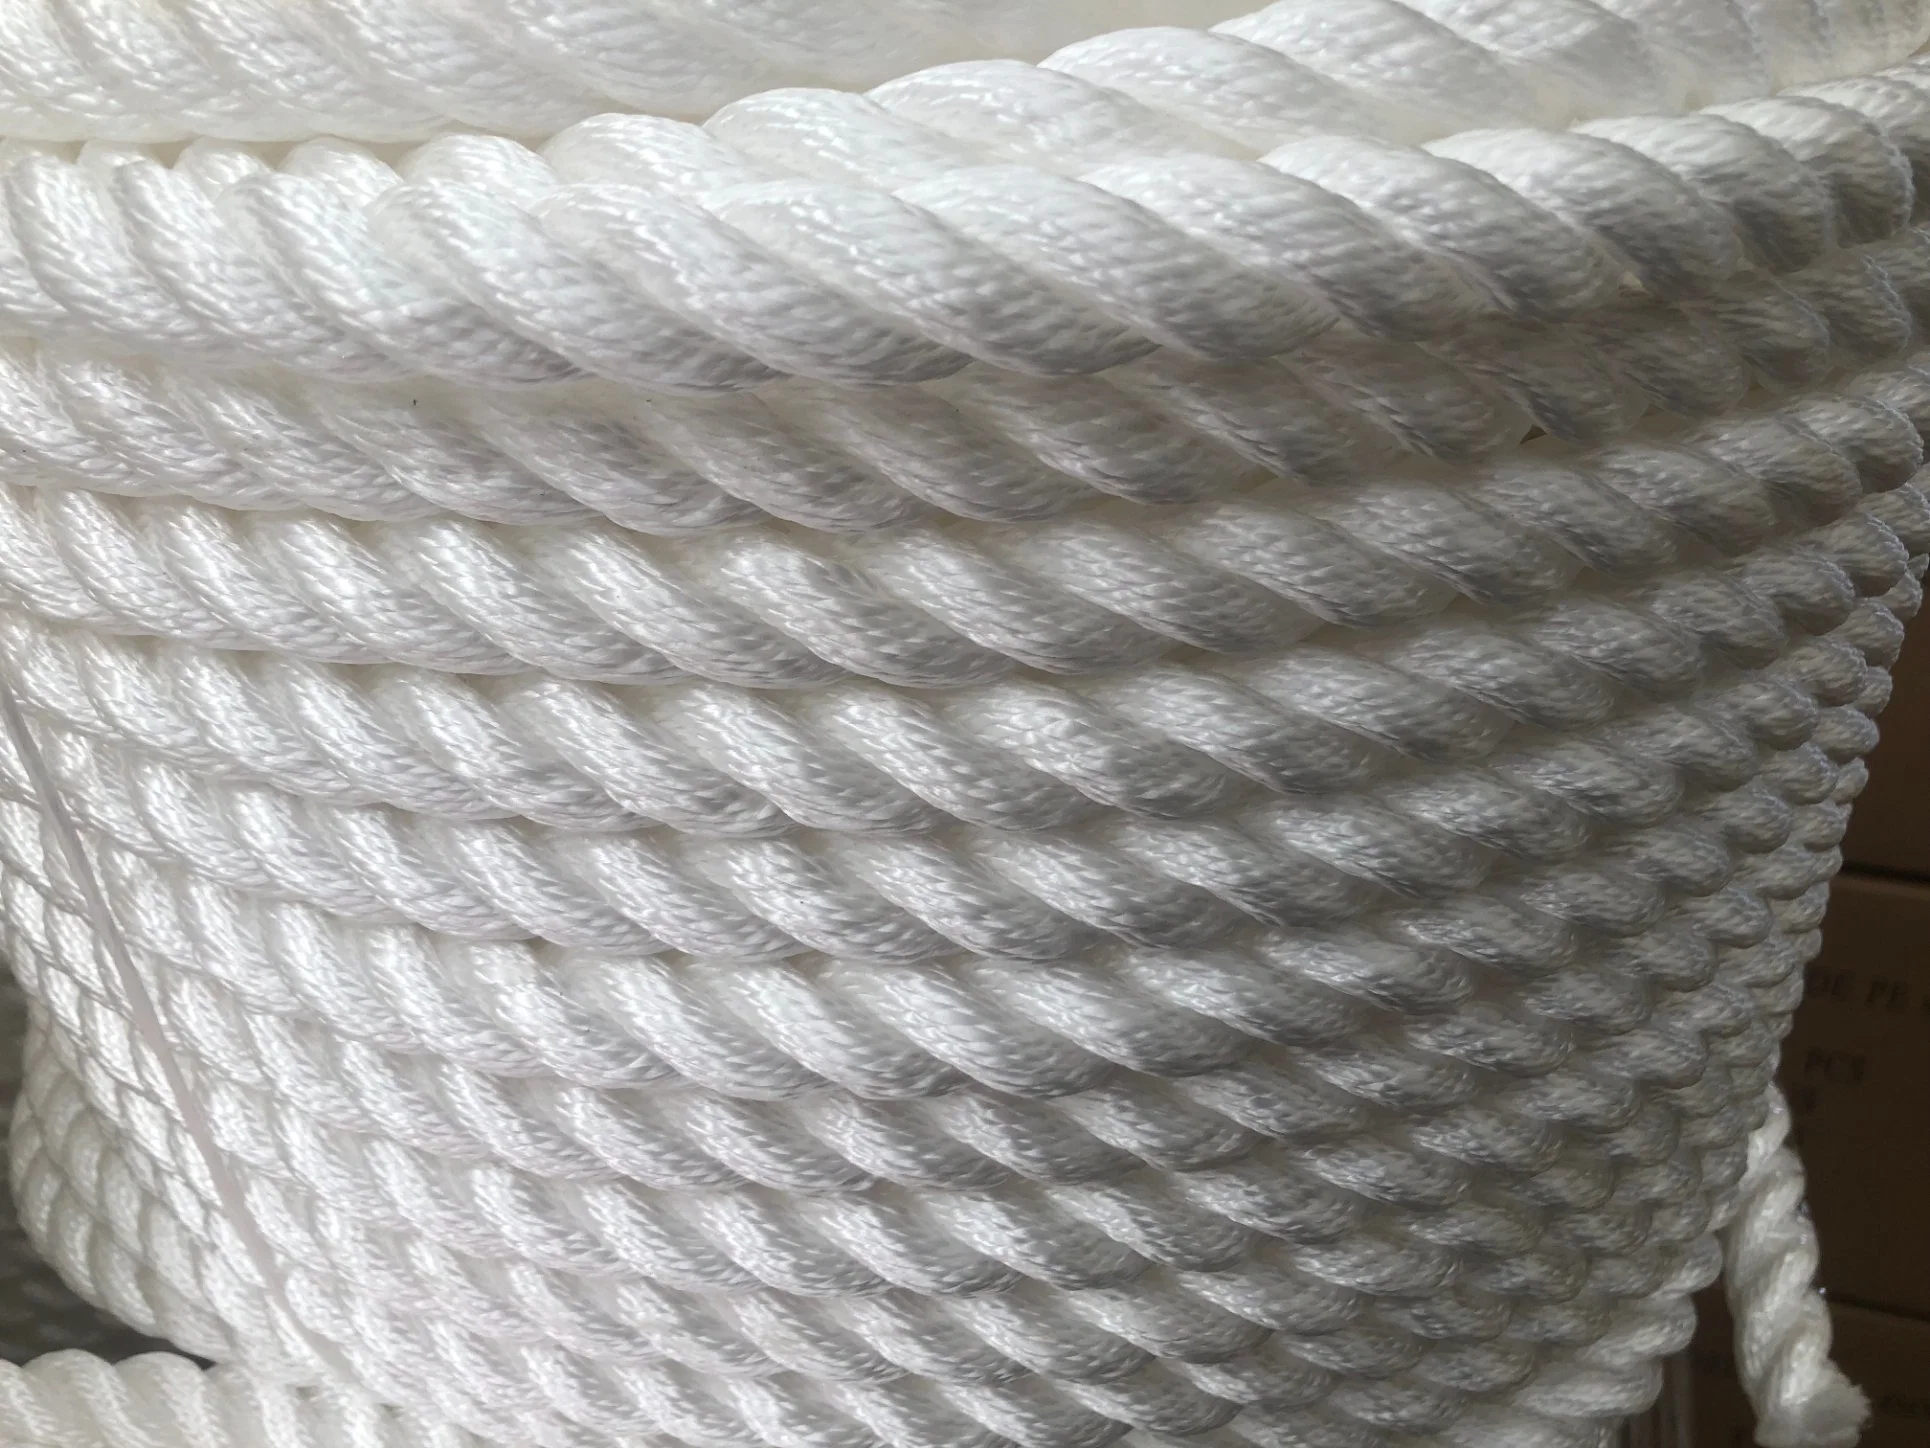 Nylon Twisted Rope, 6mm Synthetic Yarn 3 Strand/3 Ply with High quality/High cost performance 